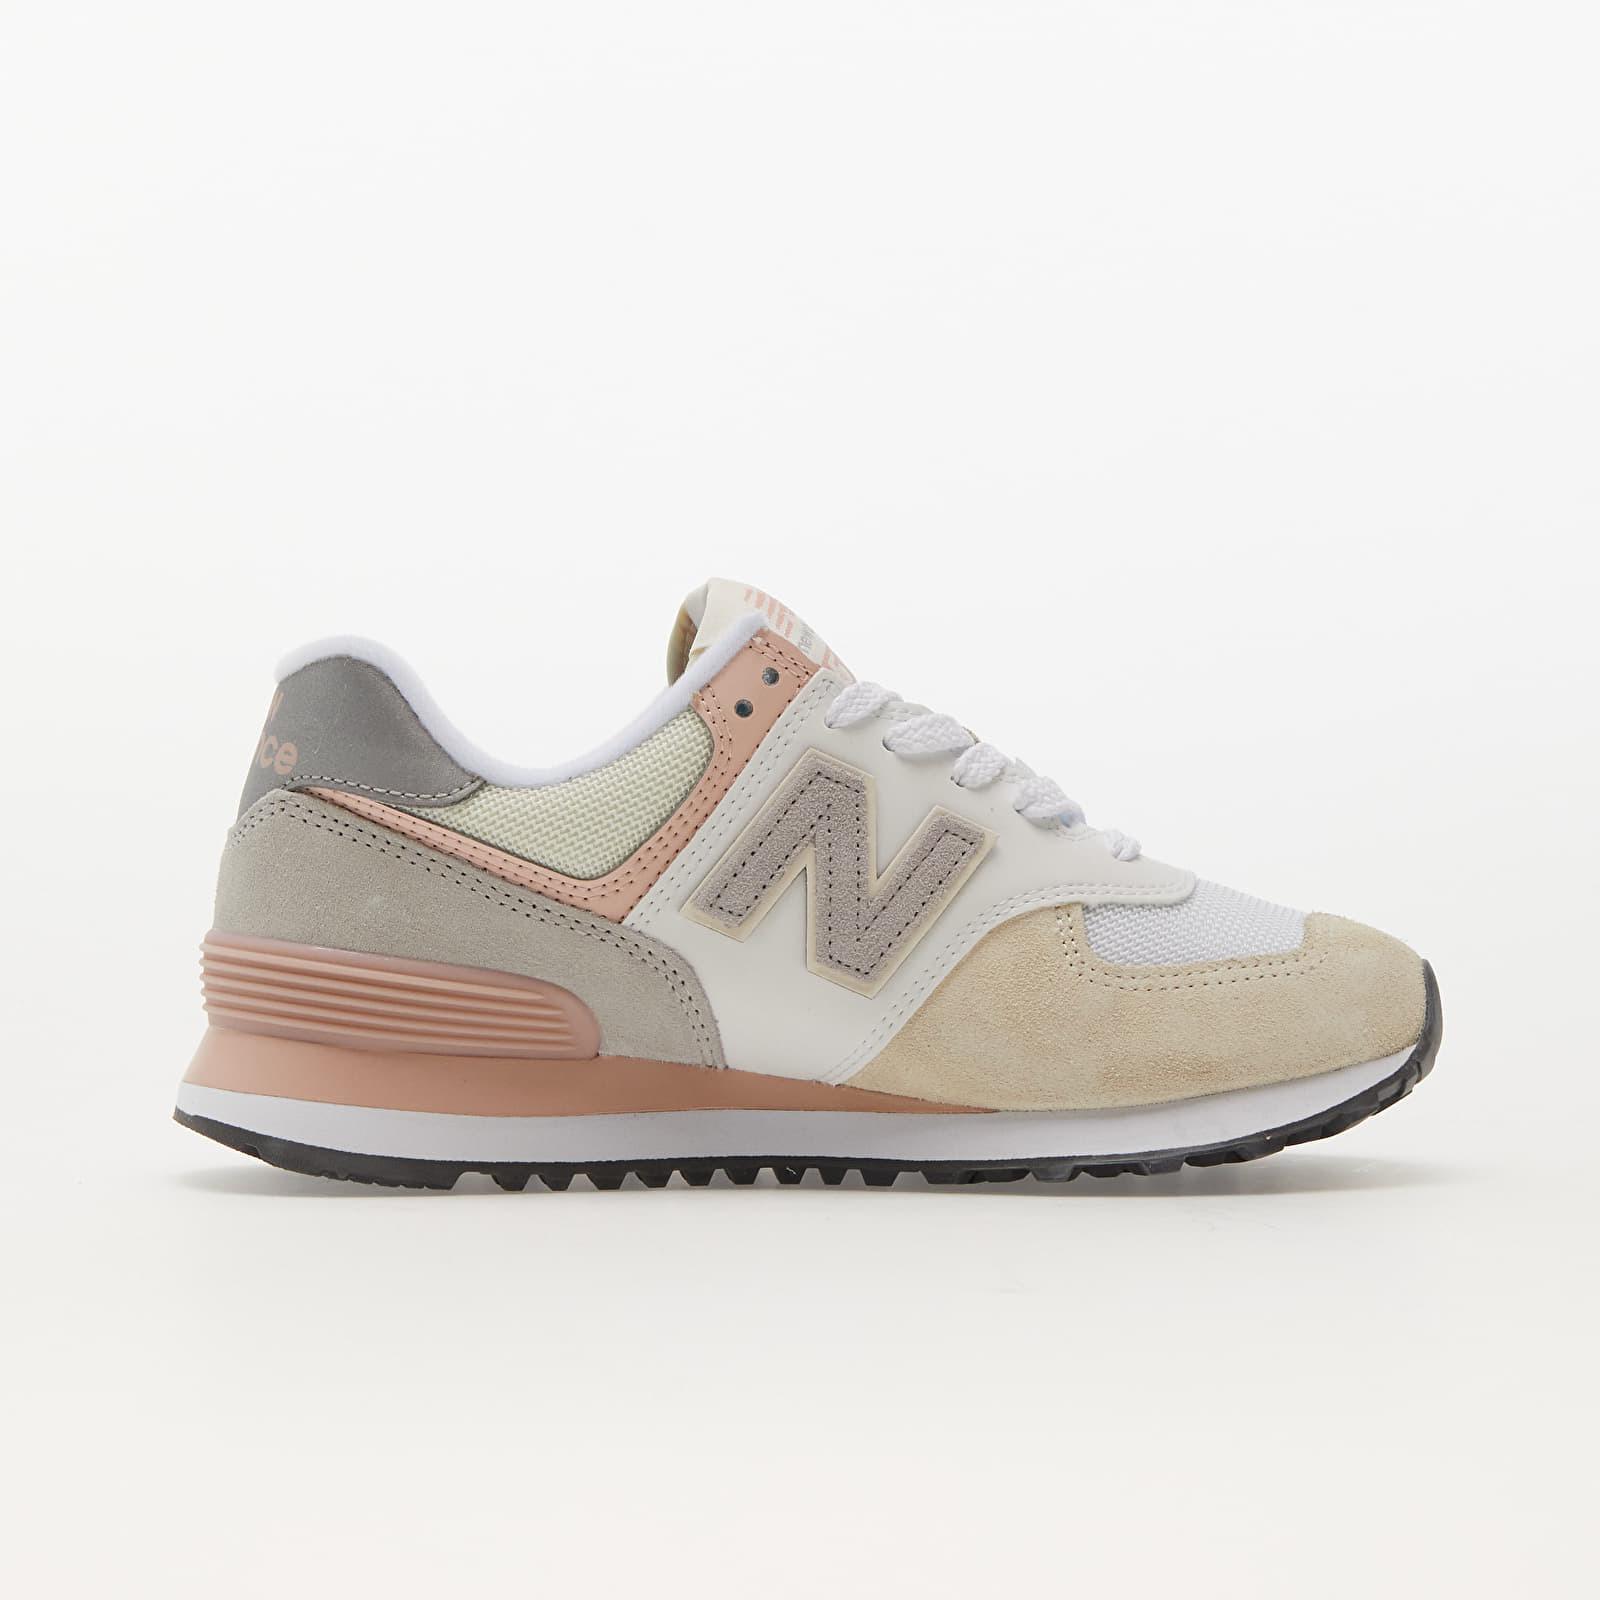 New Balance 574 Arctic Grey in White | Lyst